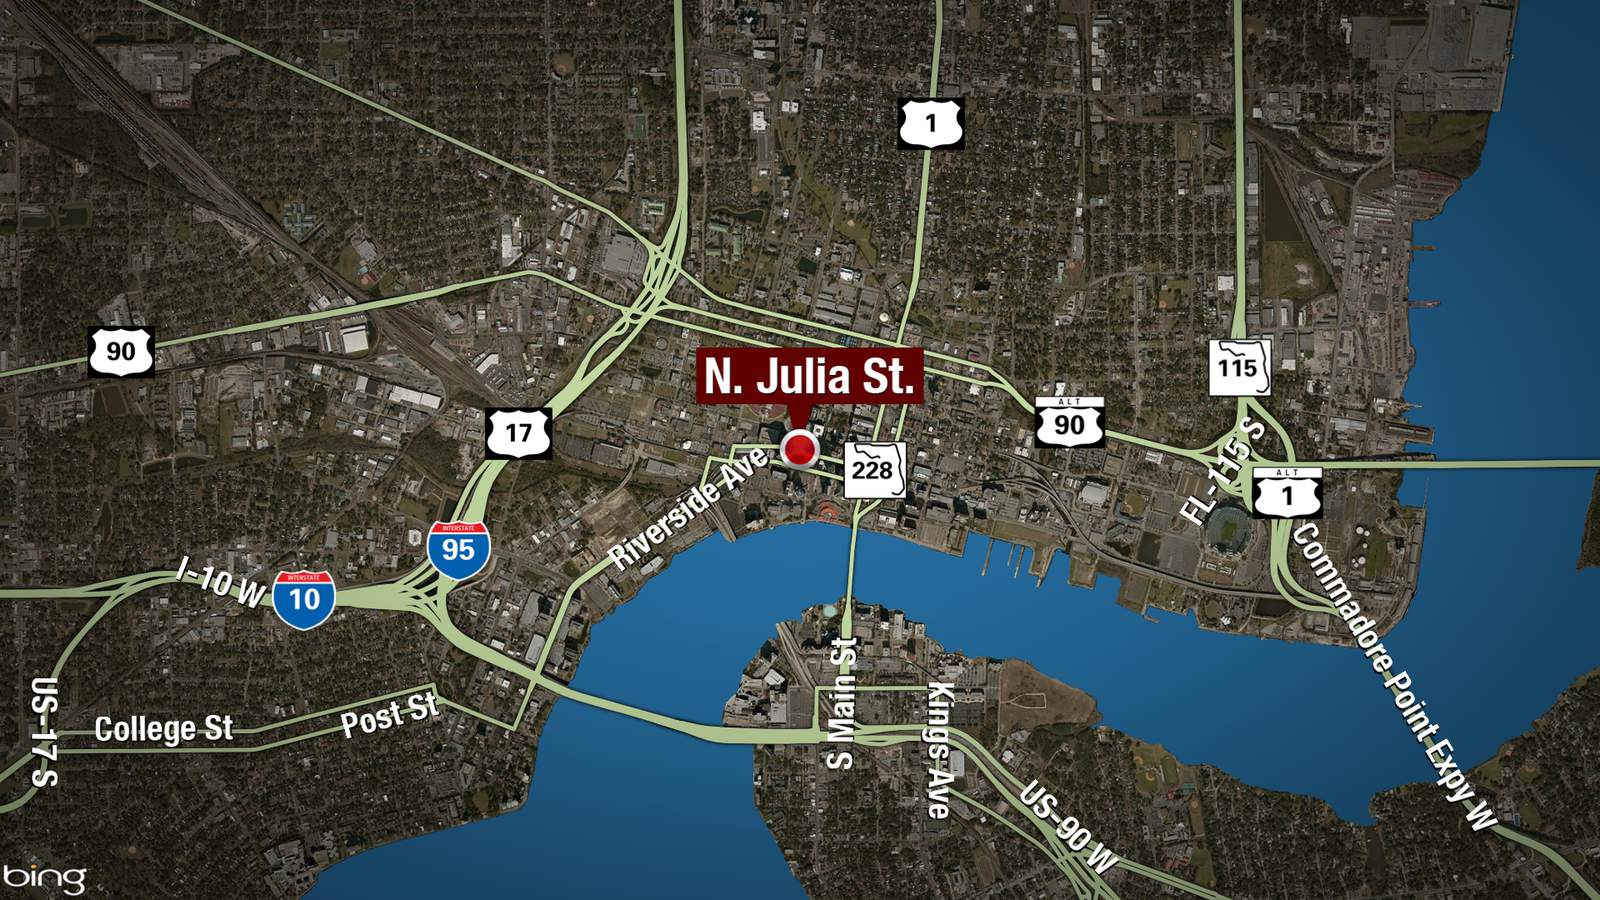 Man shot several times in Downtown Jacksonville